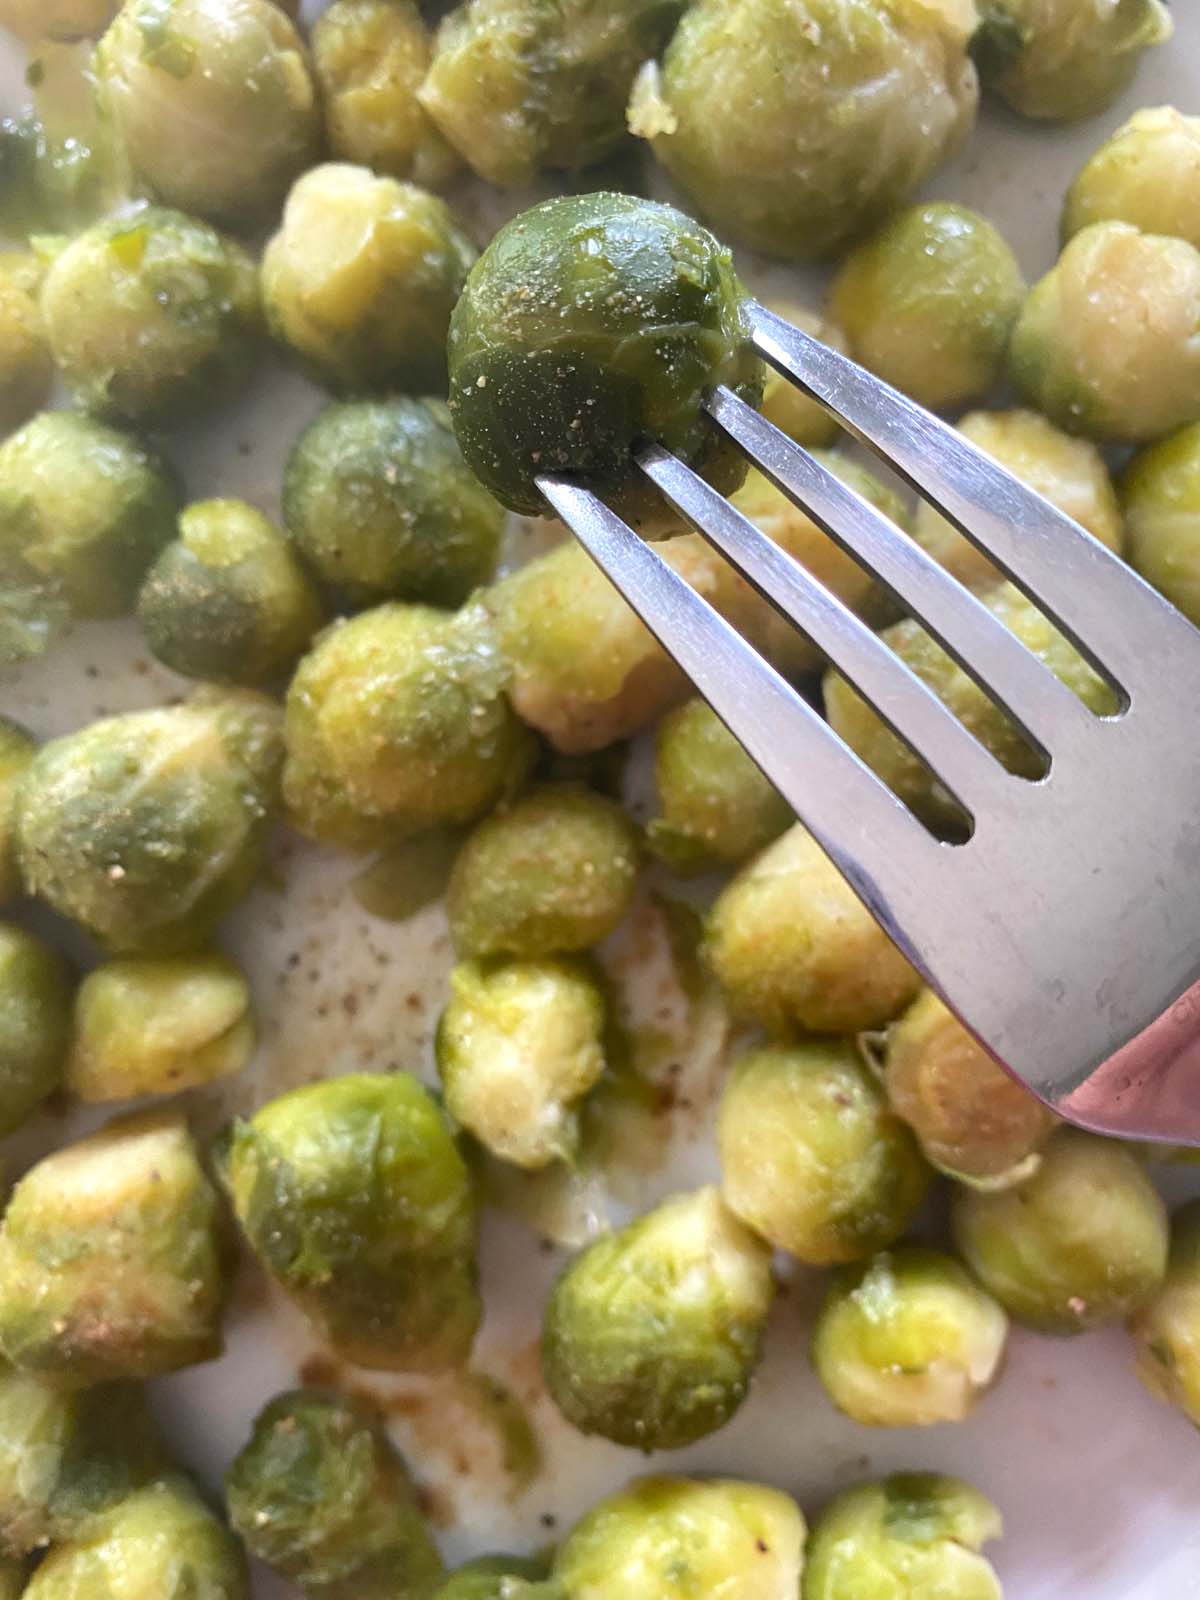 Cooked brussels sprouts on a plate.